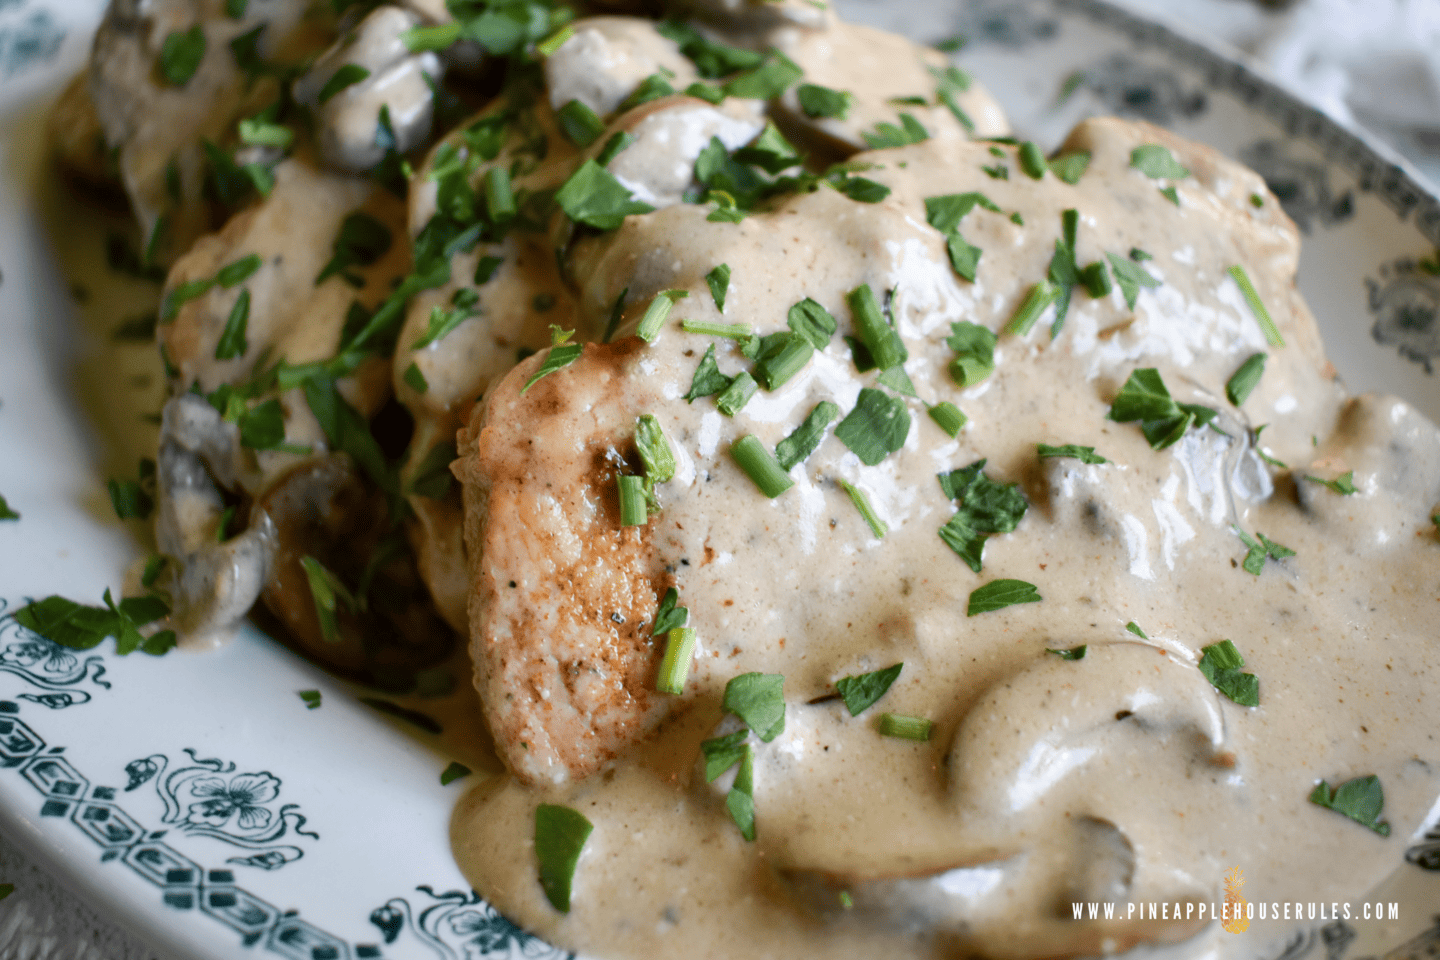 These Garlic and Mushroom Pork Chops in Creamy White Wine Sauce are an easy recipe that's quick and full of flavor! It's perfect for a busy weeknight! Pork Chops | Pork Chops Recipes | Pork Chops and Gravy | Easy Dinner Recipes | Easy Dinner Recipes Healthy | Easy Meals | Easy Healthy Dinner | Easy Dinner | Pork Chop Recipes | Pork Recipes | Creamy Pork Chops | Creamy Pork Chop Recipes | Low Carb Recipes | Mushroom Recipes